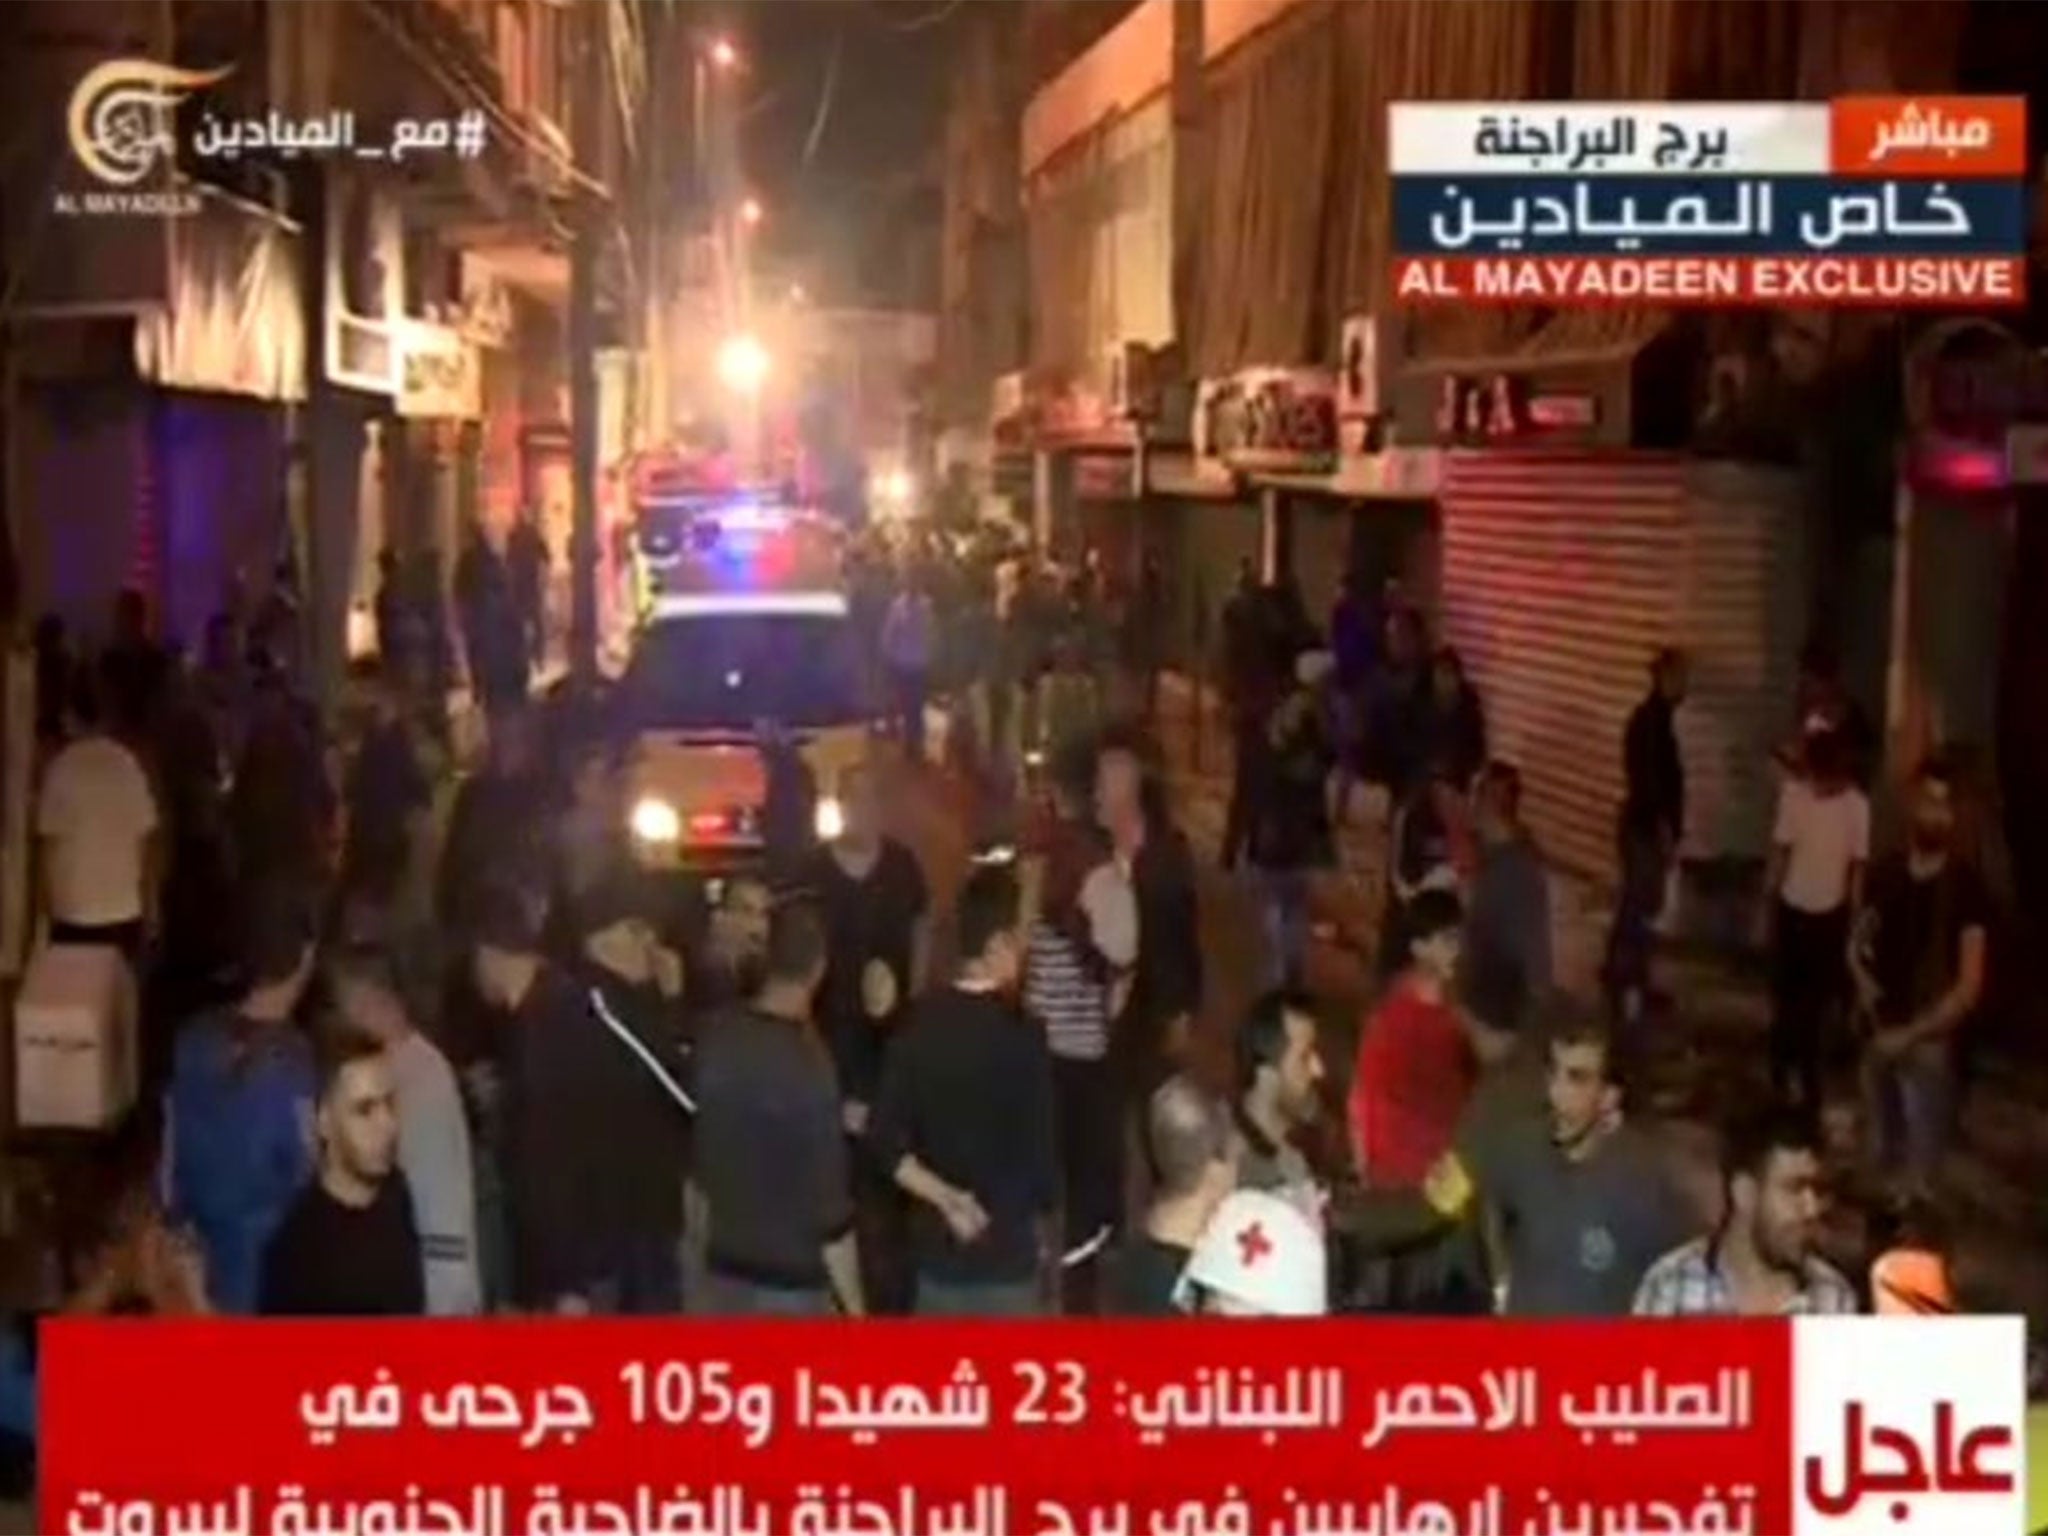 Stills from nearby the epicentre of the explosions